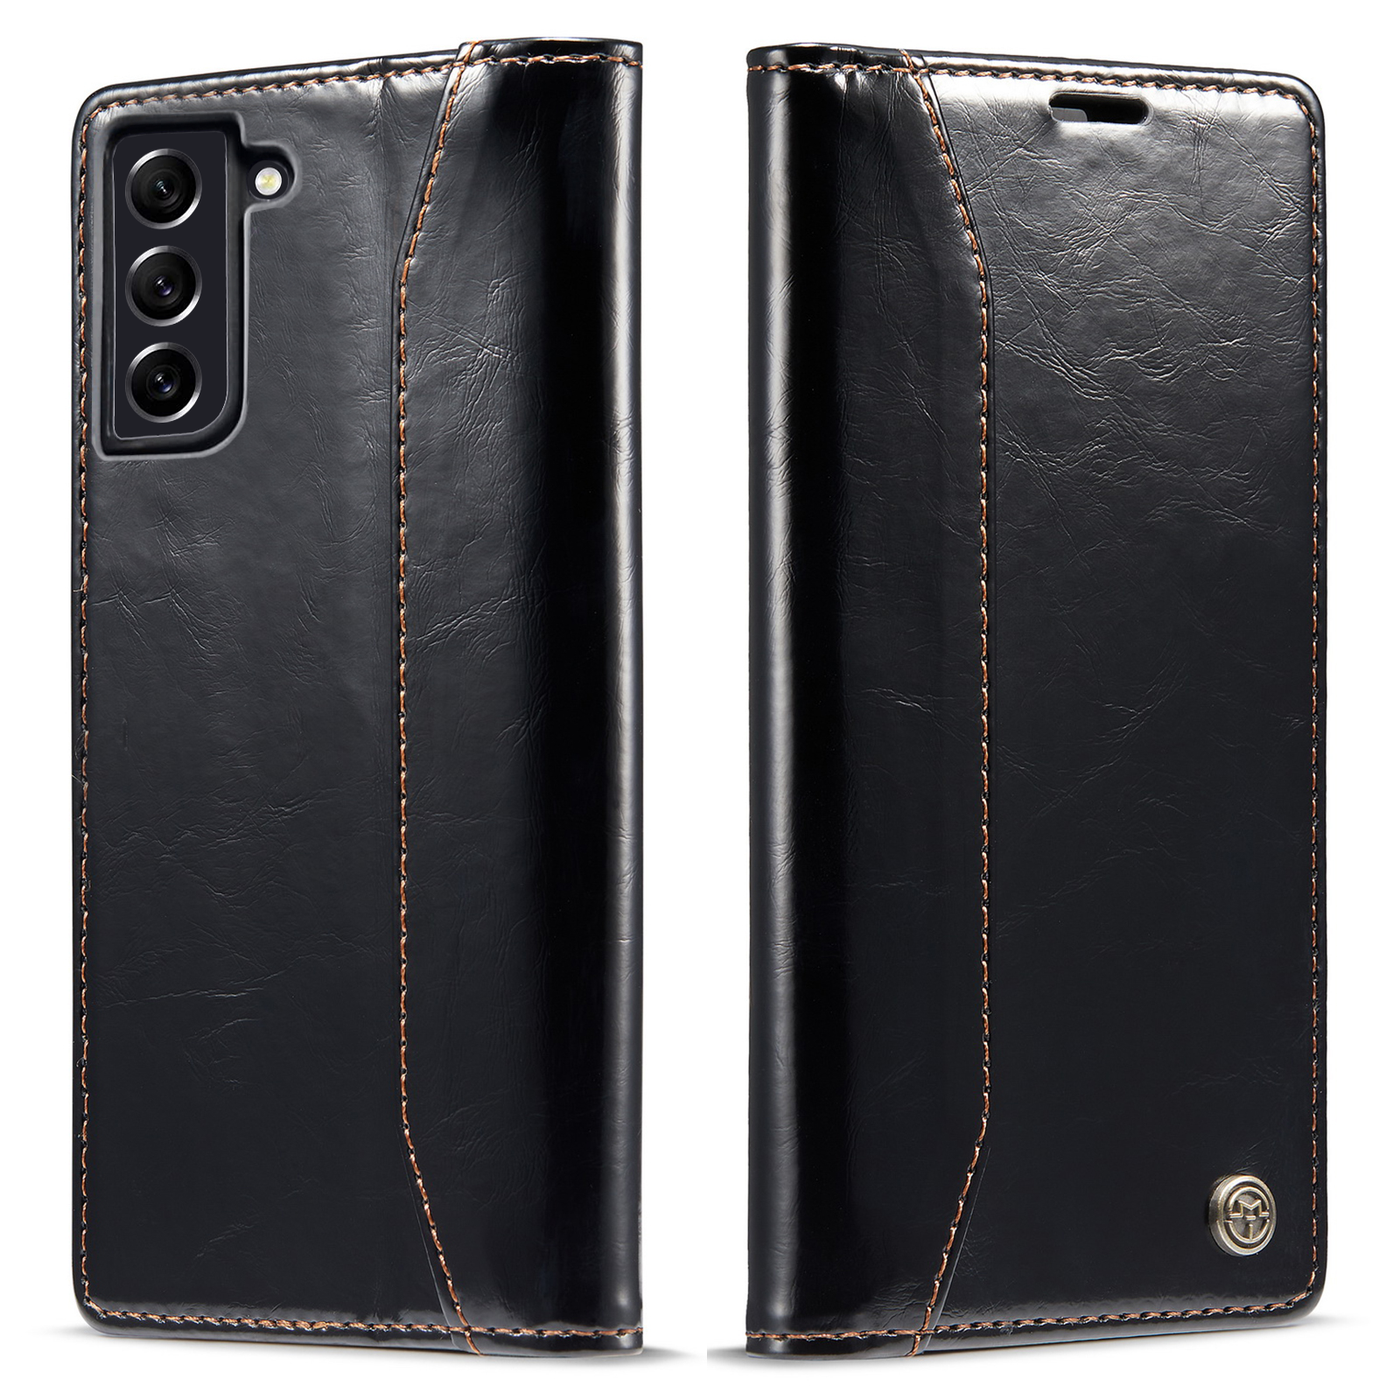 Excelsior Premium PU Leather Wallet flip Cover Case For Samsung Galaxy S21 FE 5G